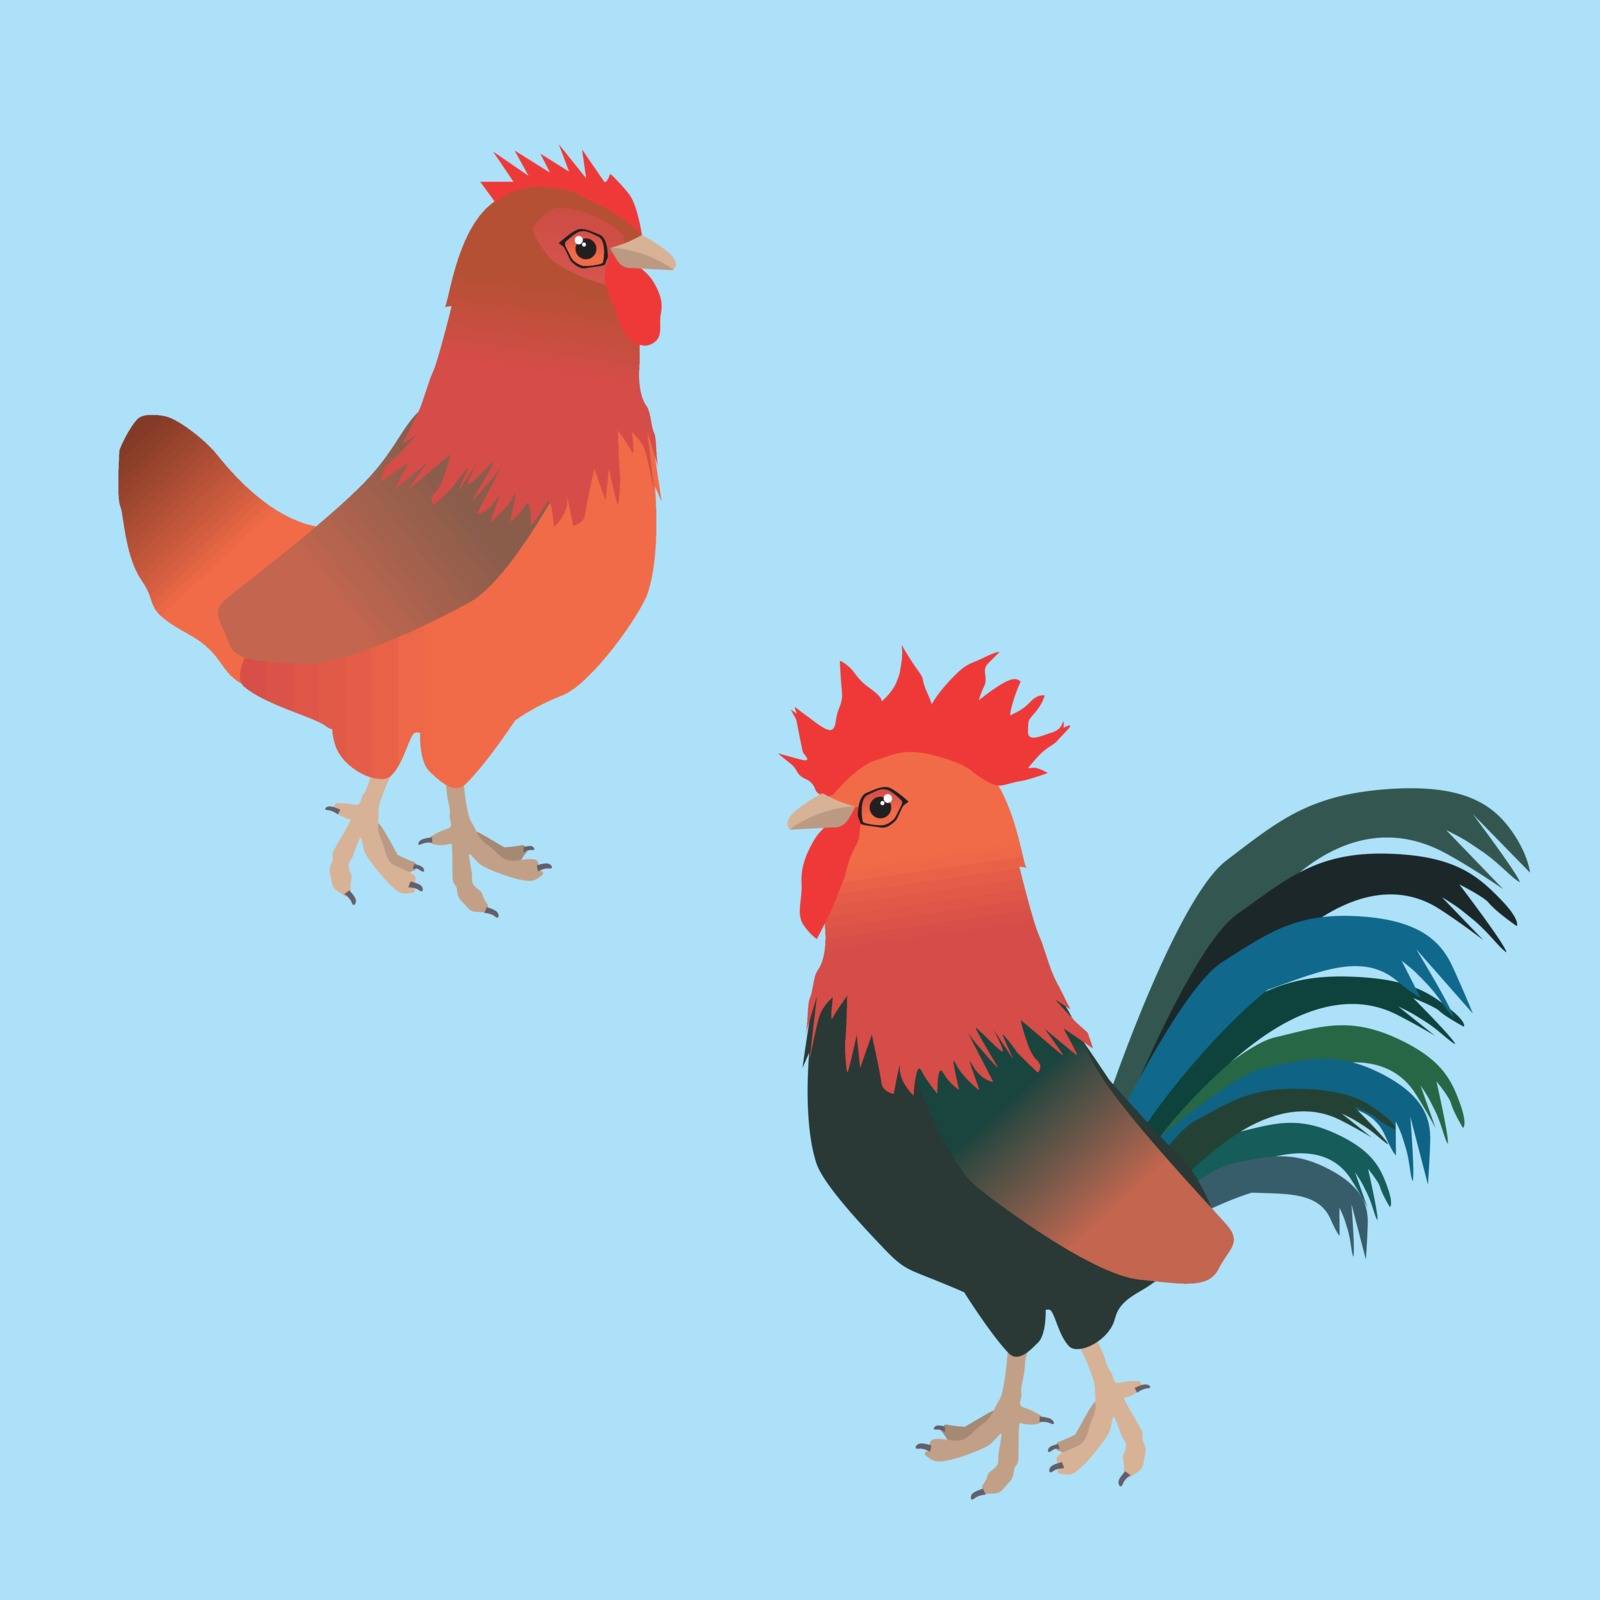 A couple of Welsumer chickens by Bwise